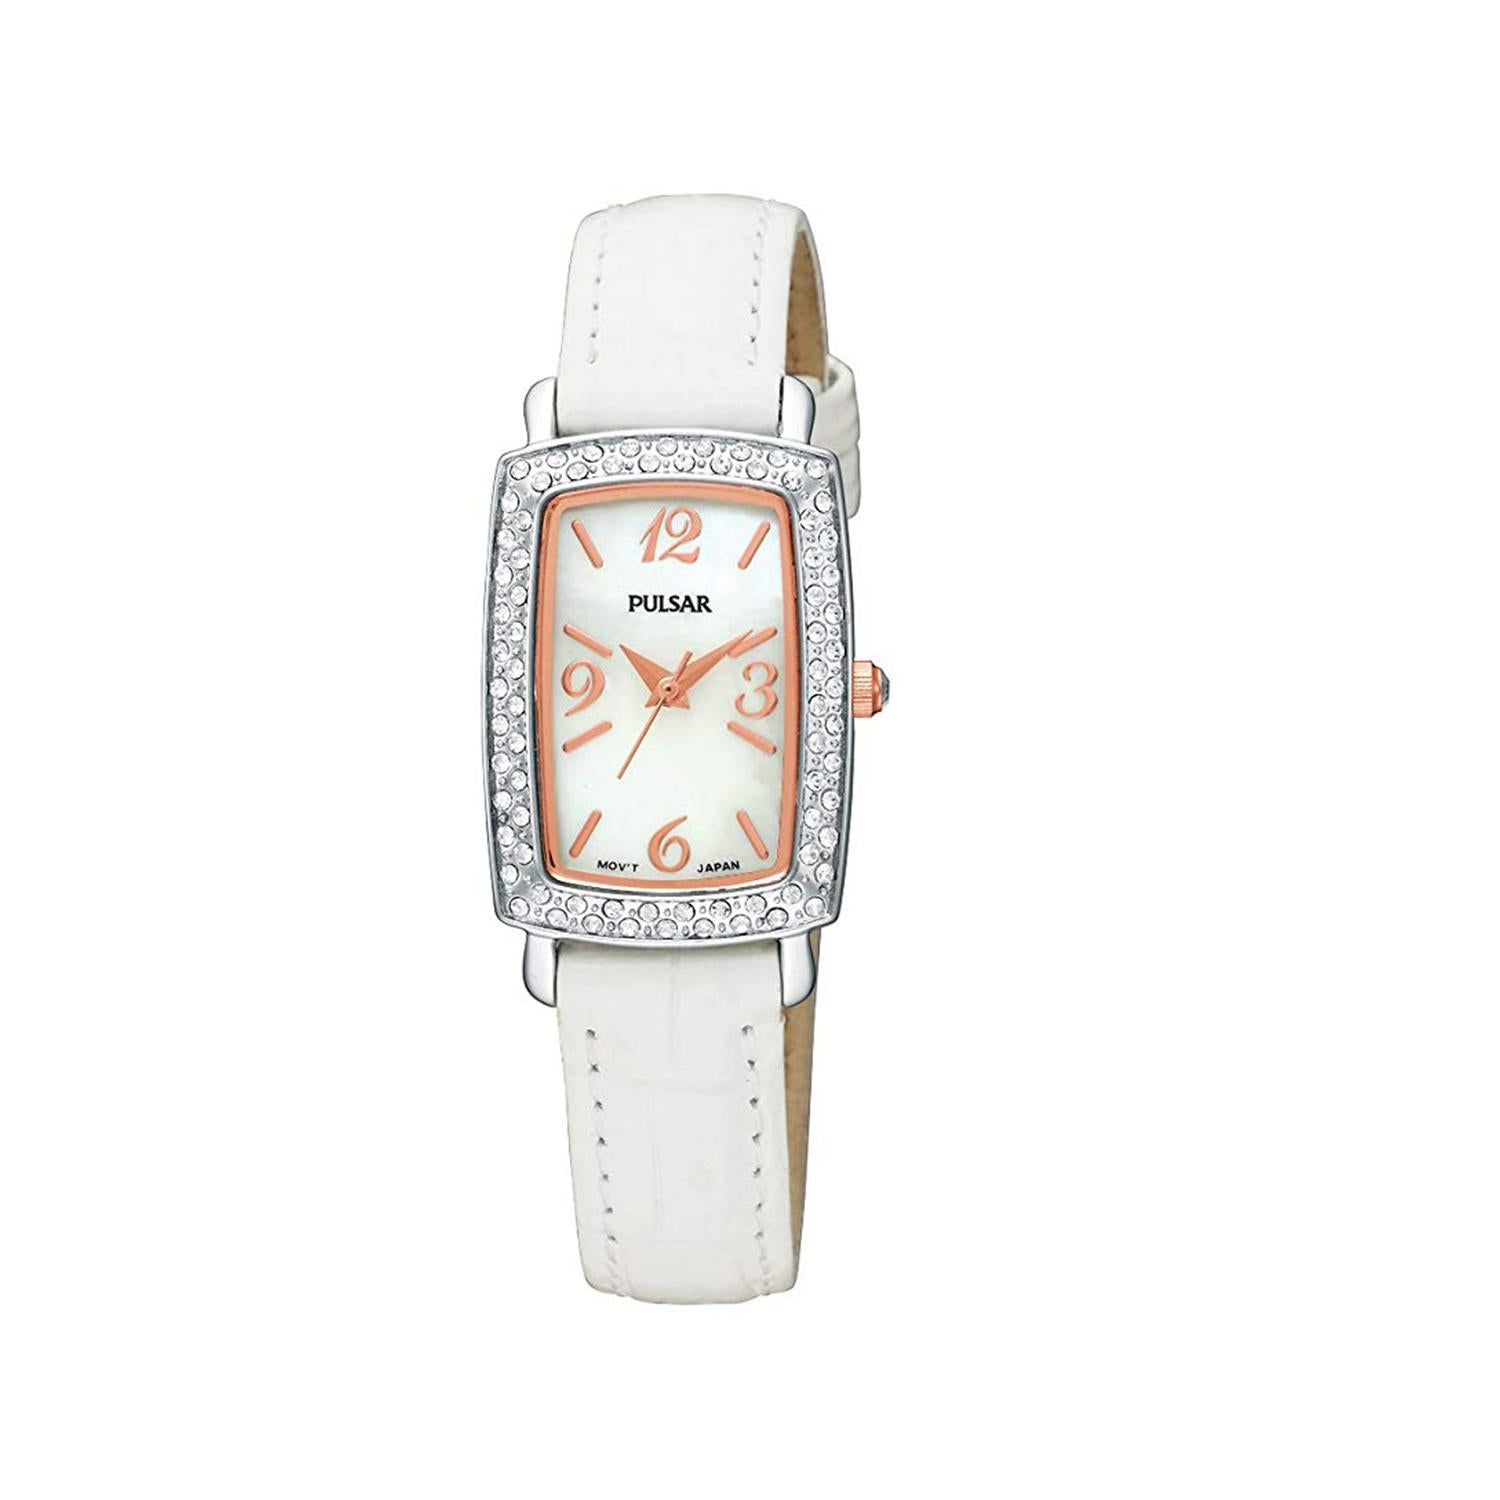 Pre-owned Pulsar Stainless Steel White MOP Dial White Leather Strap Ladies Watch PTC503. The case of this watch has has minor scratches and Nicks. The white Leather has Minor Stains. This Beautiful Timepiece Is Powered by a Quartz (Battery) Movement